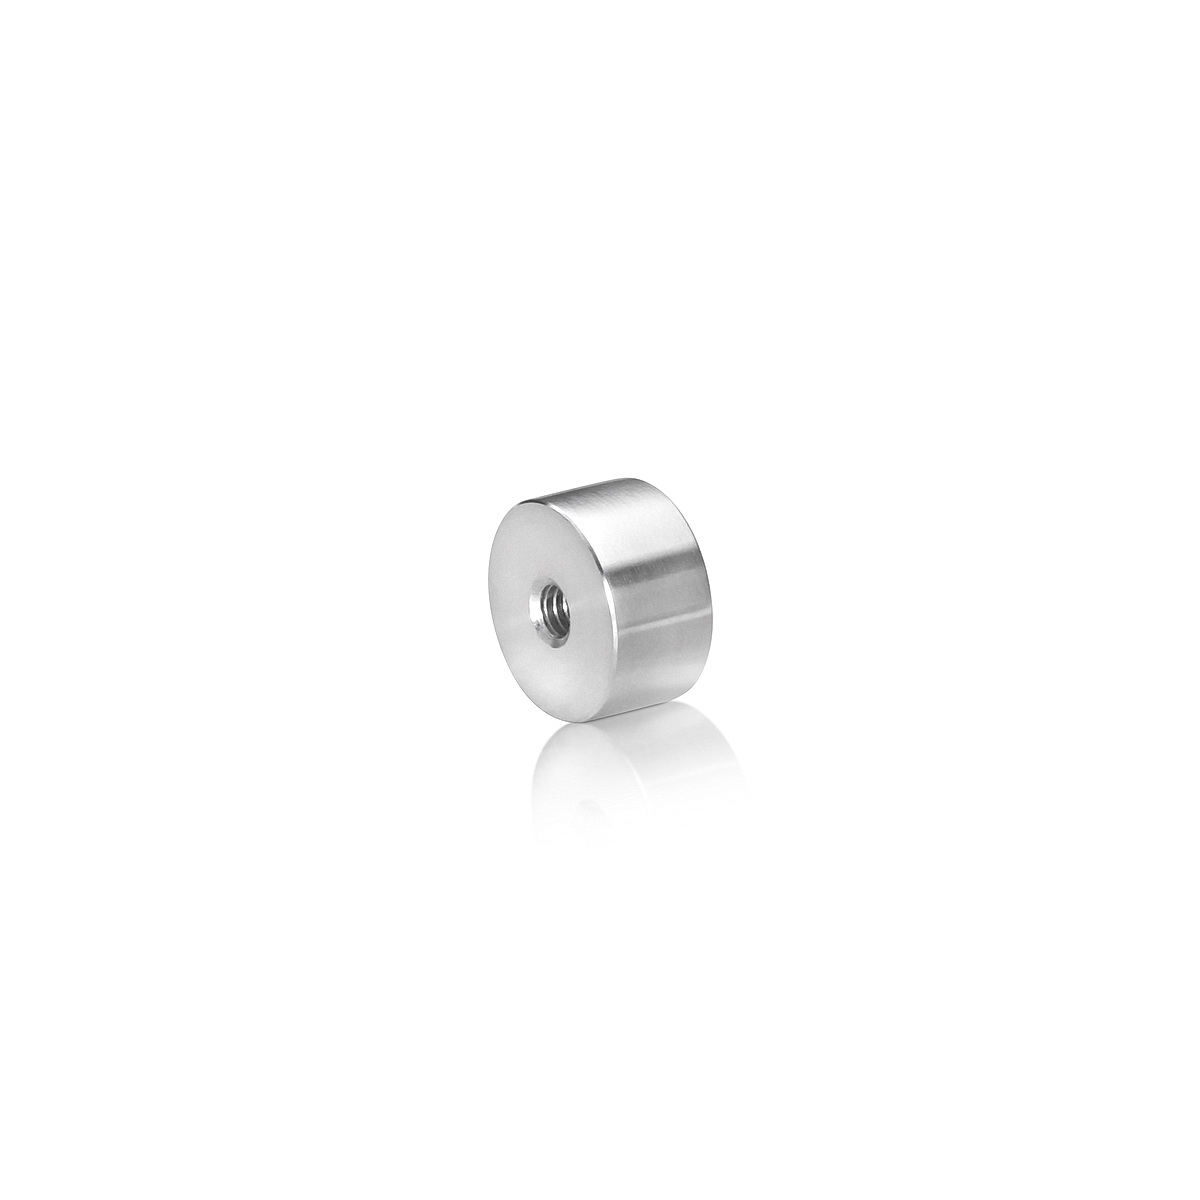 1/4-20 Threaded Barrels Diameter: 1'', Length: 1/2'', Brushed Satin Finish Grade 304 [Required Material Hole Size: 17/64'' ]